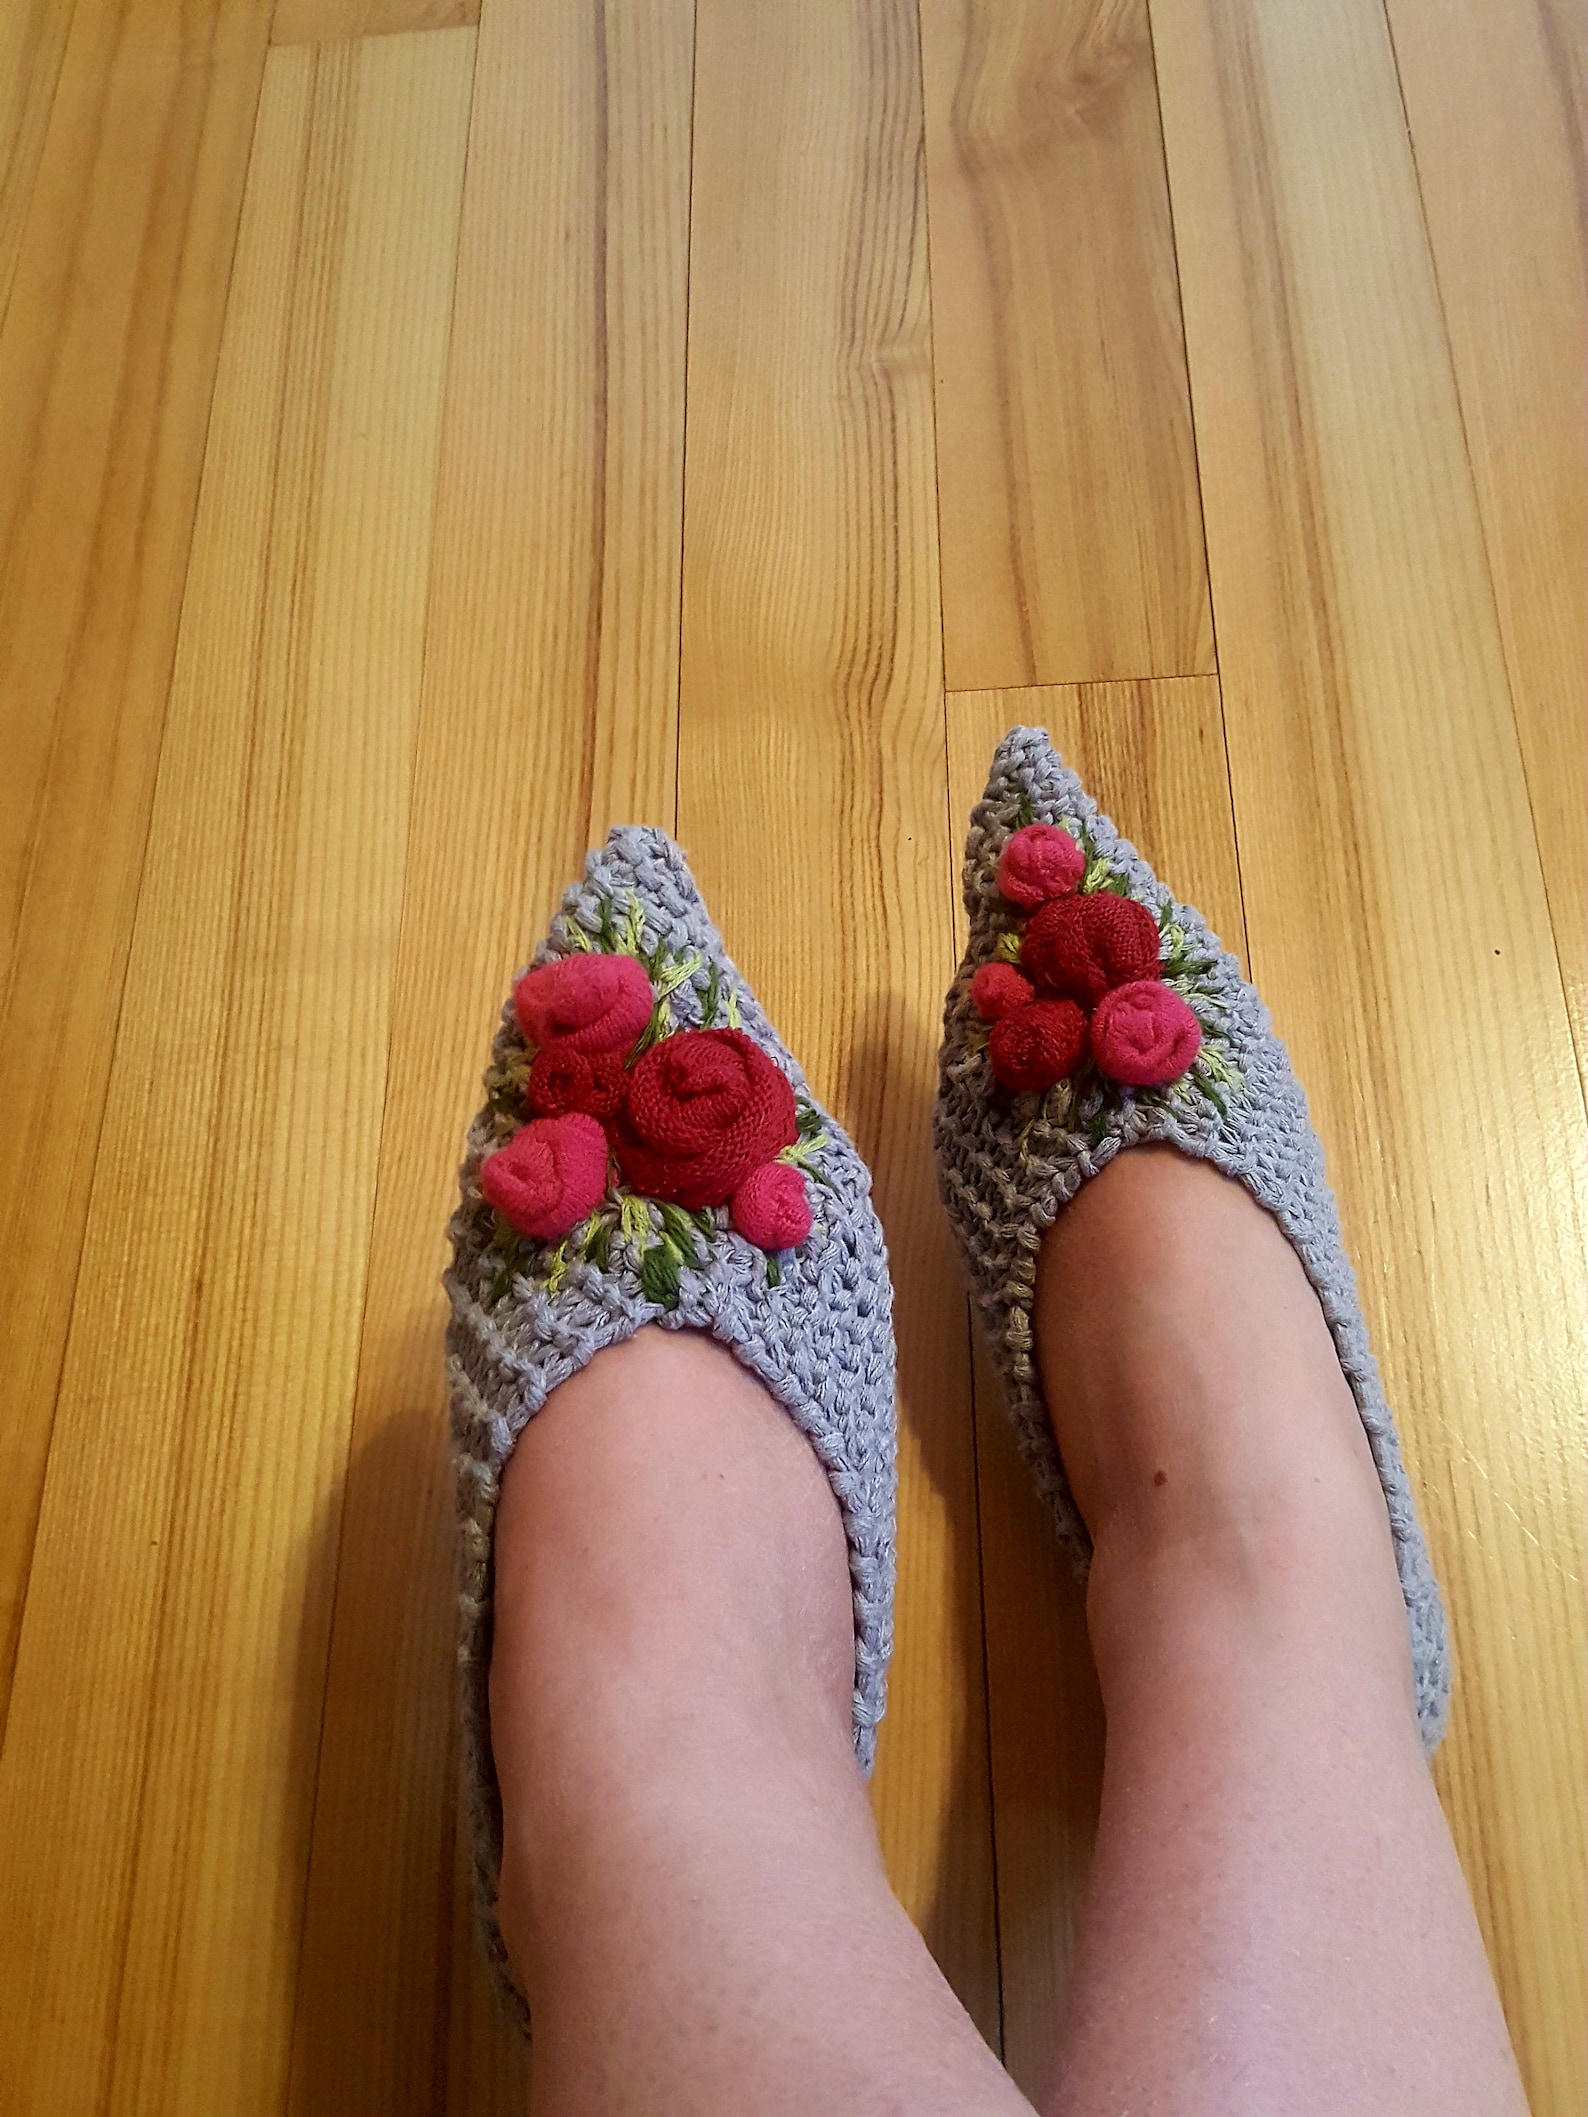 grey cotton womens slippers.hand knitted shoes.embroidered flowers.pink rose.ballet flats home shoes .boho floral inspiration.fr